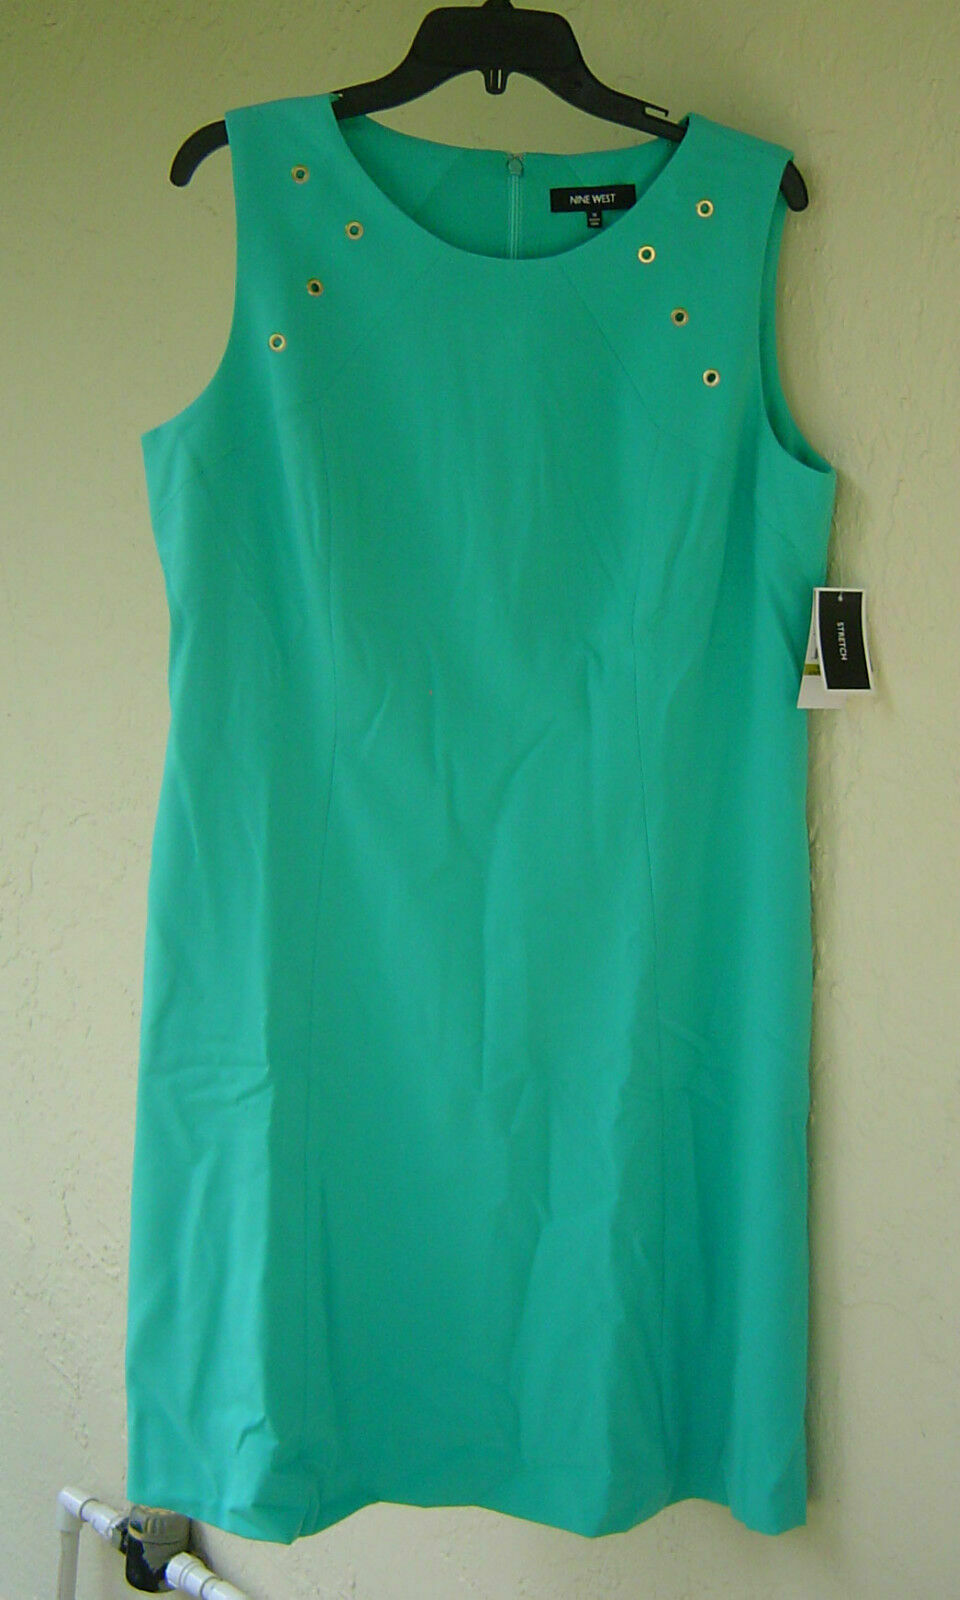 Primary image for NEW NINE WEST BLUE GREEN A LINE CAREER  DRESS SIZE 14 $99